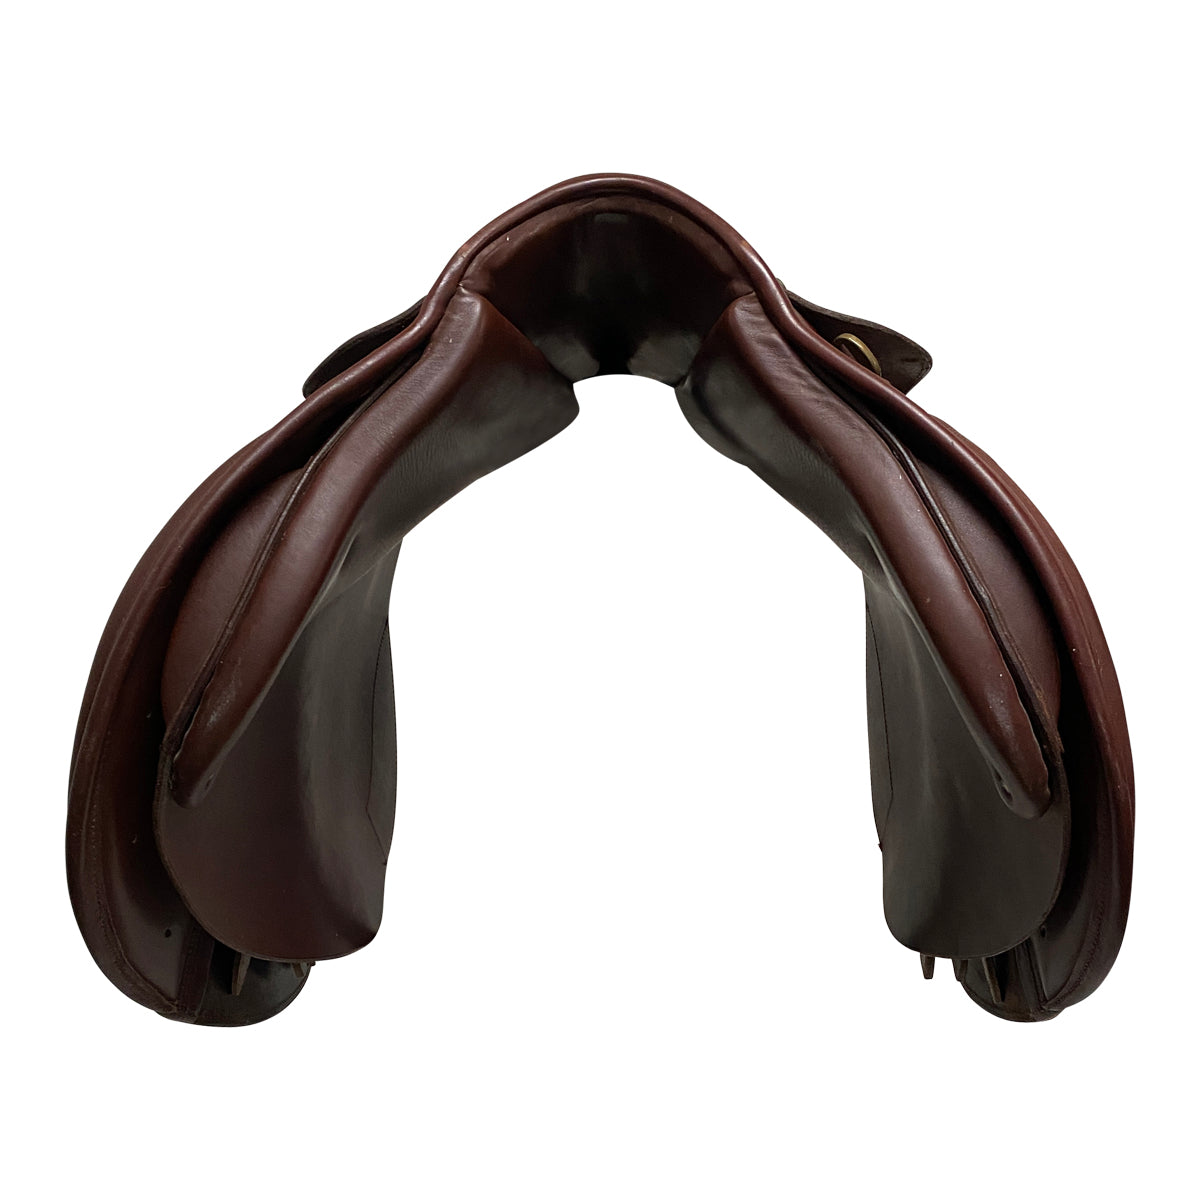 Dover 'Full Contact Deluxe' Circuit Saddle in Chestnut